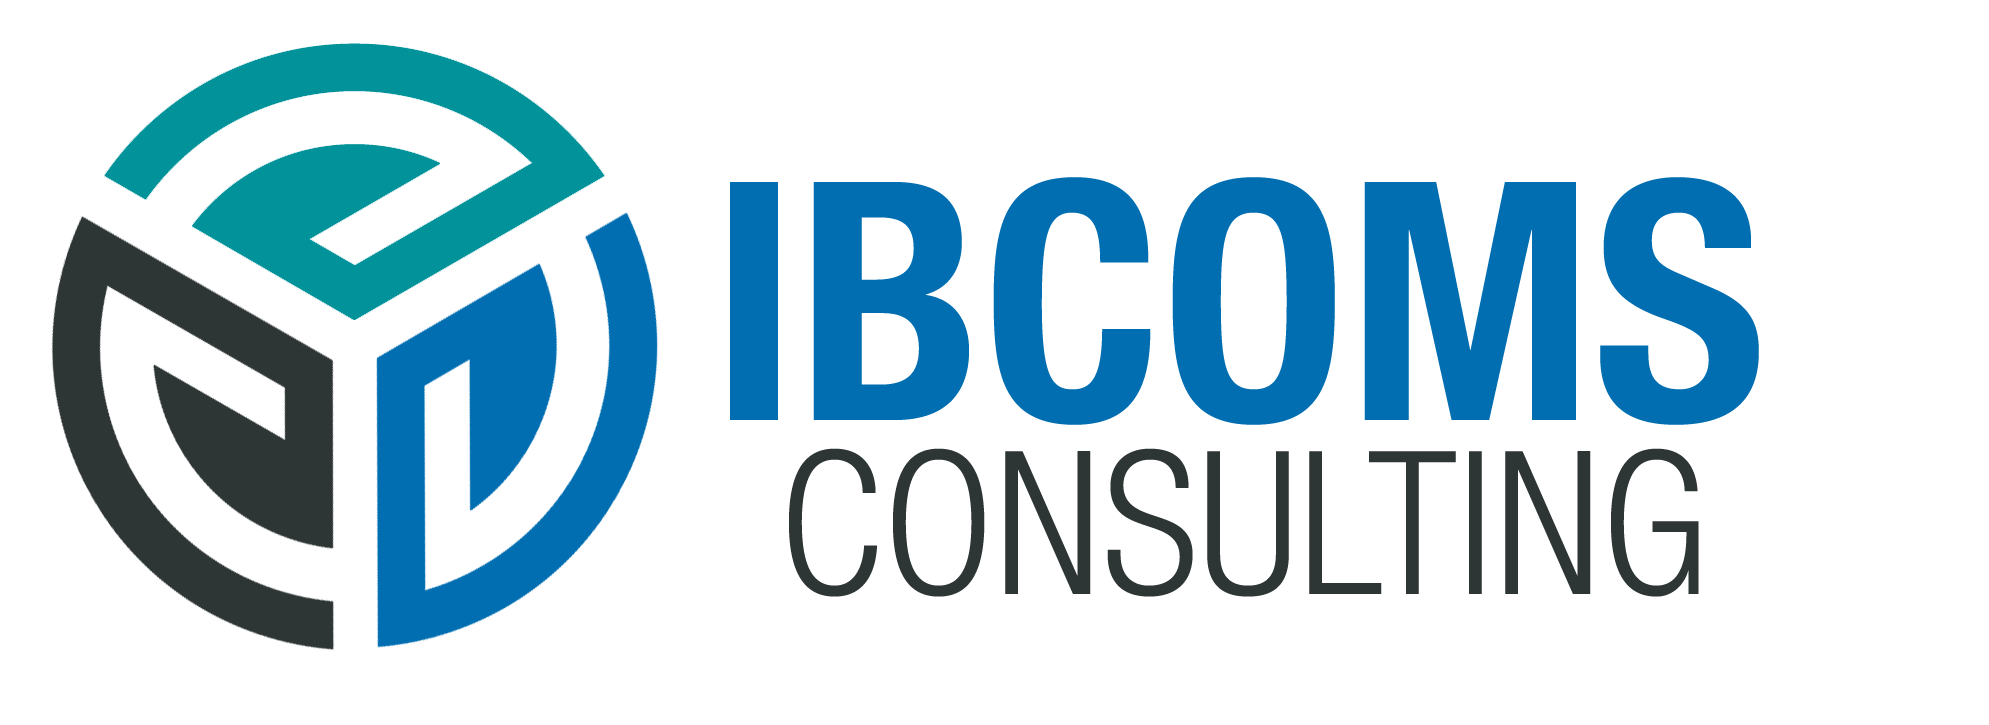 IBCOMS Consulting Logo